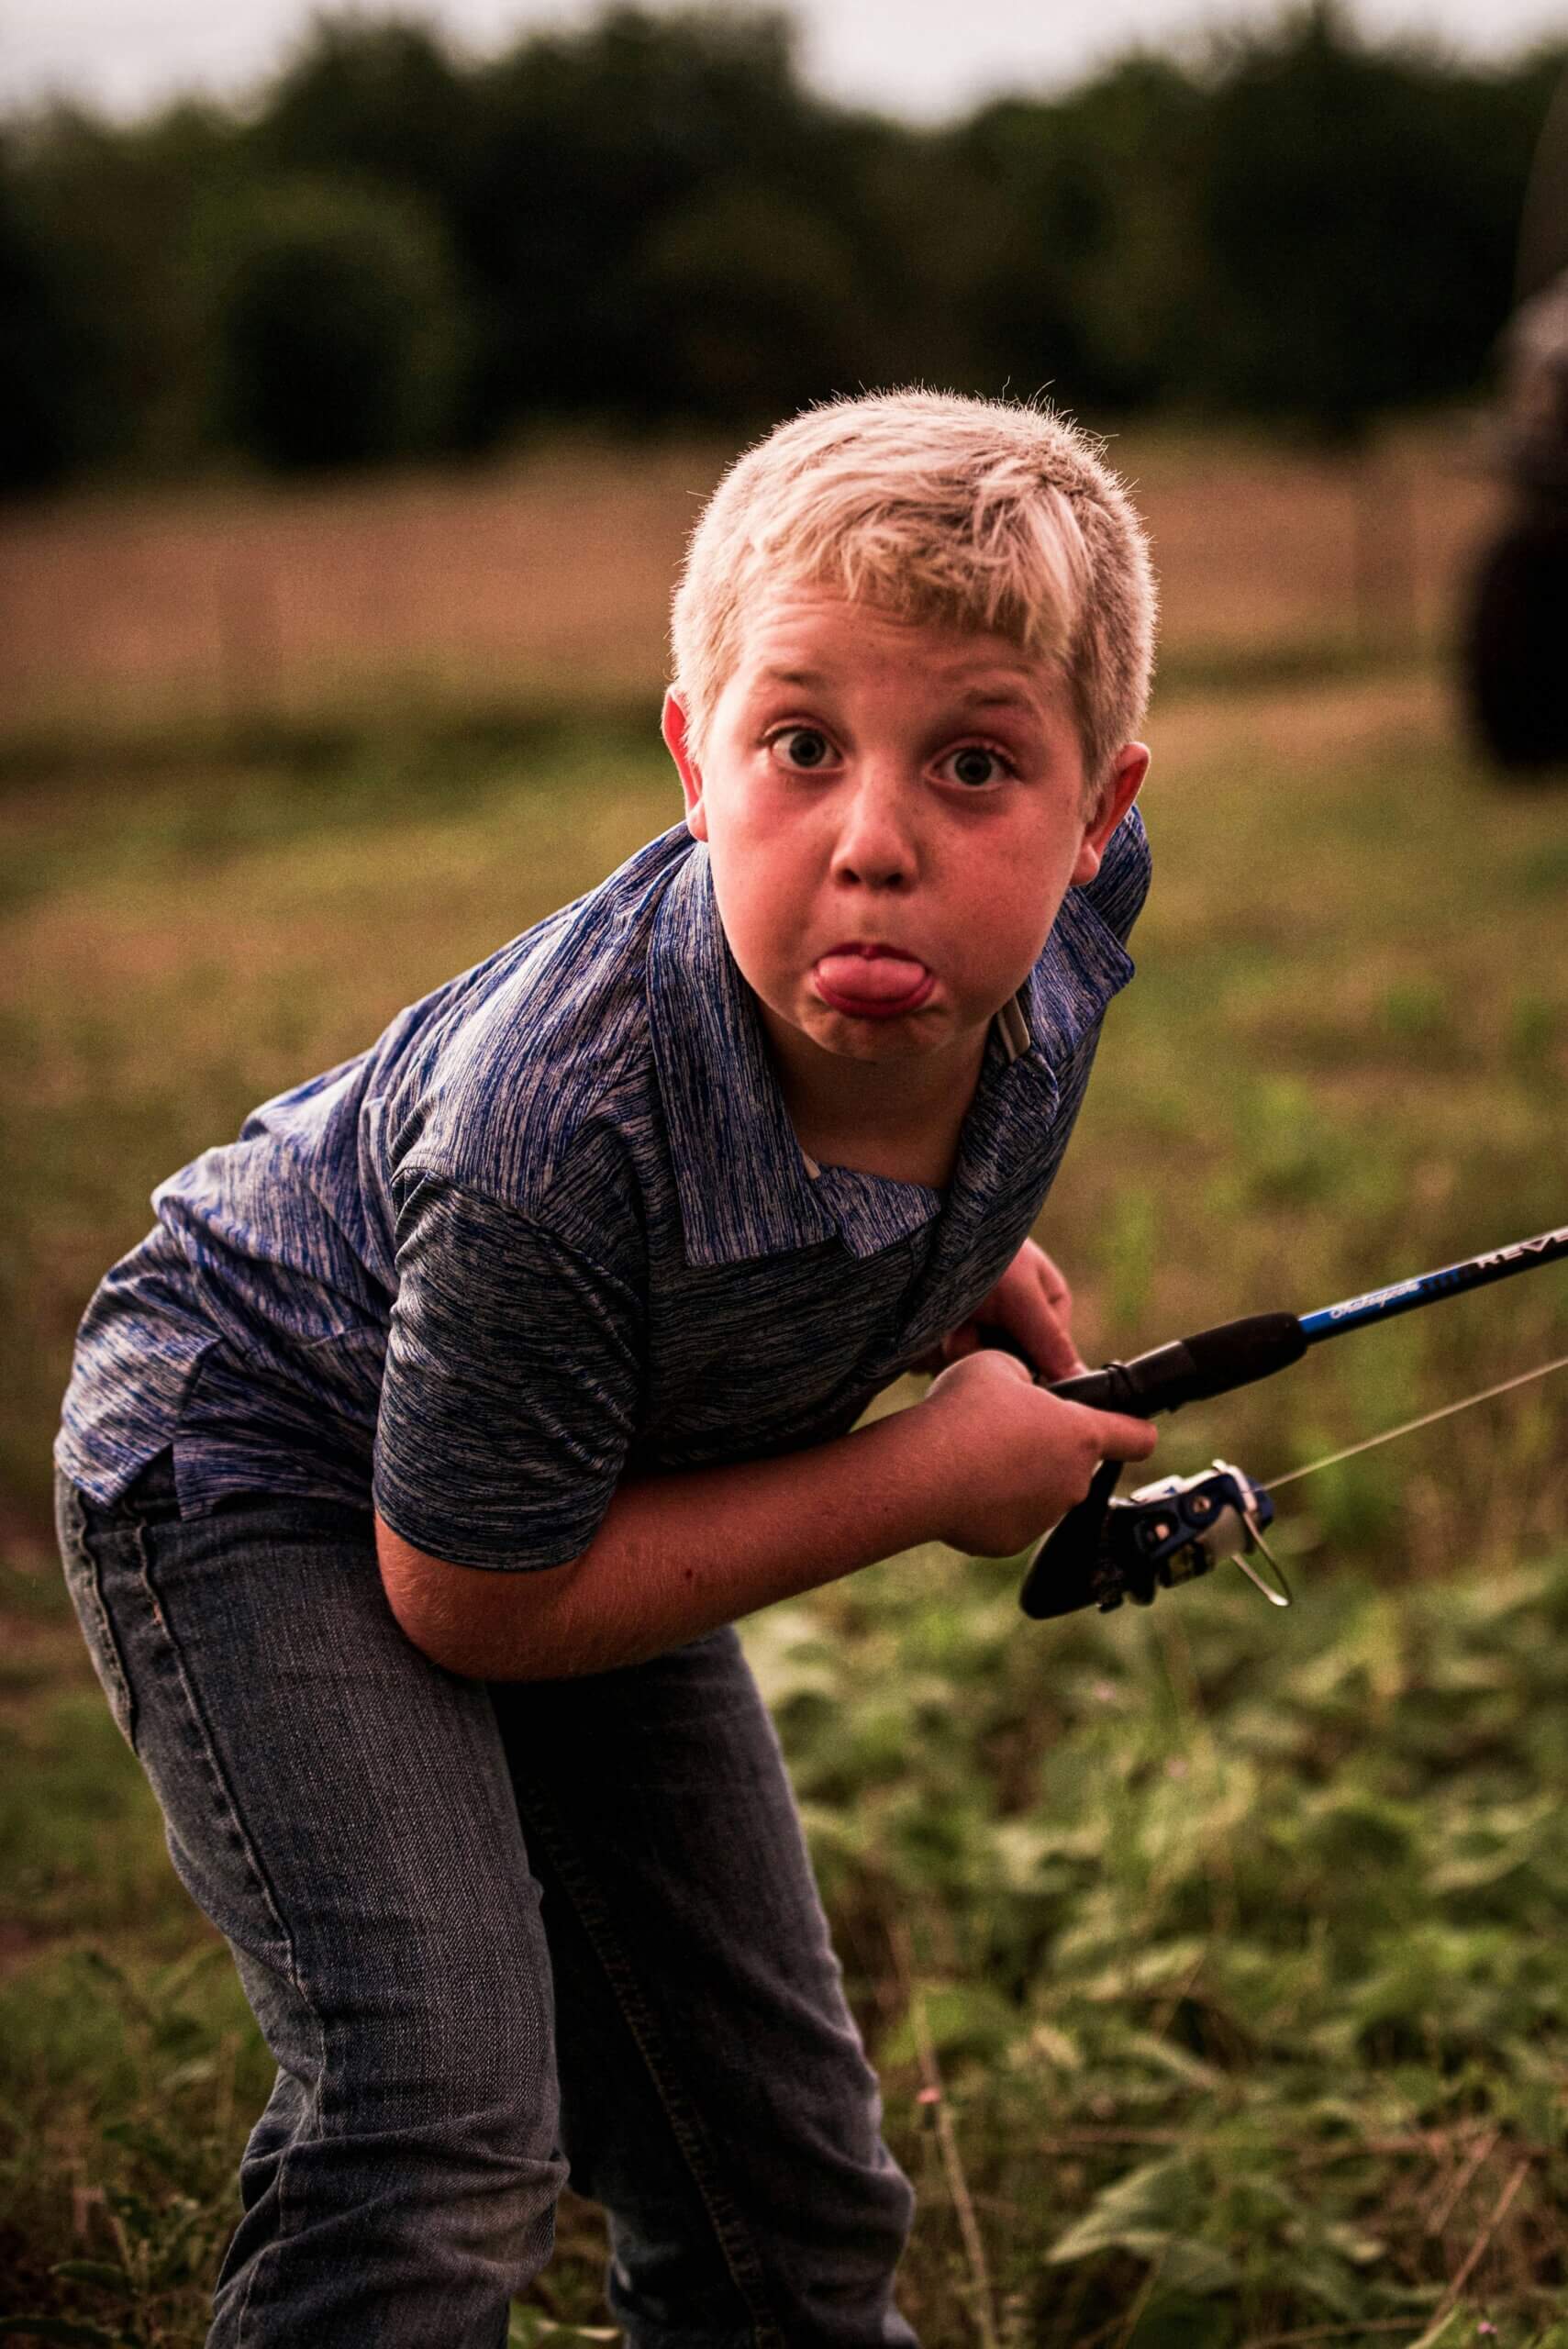 kid sticking out tongue holding fishing pole